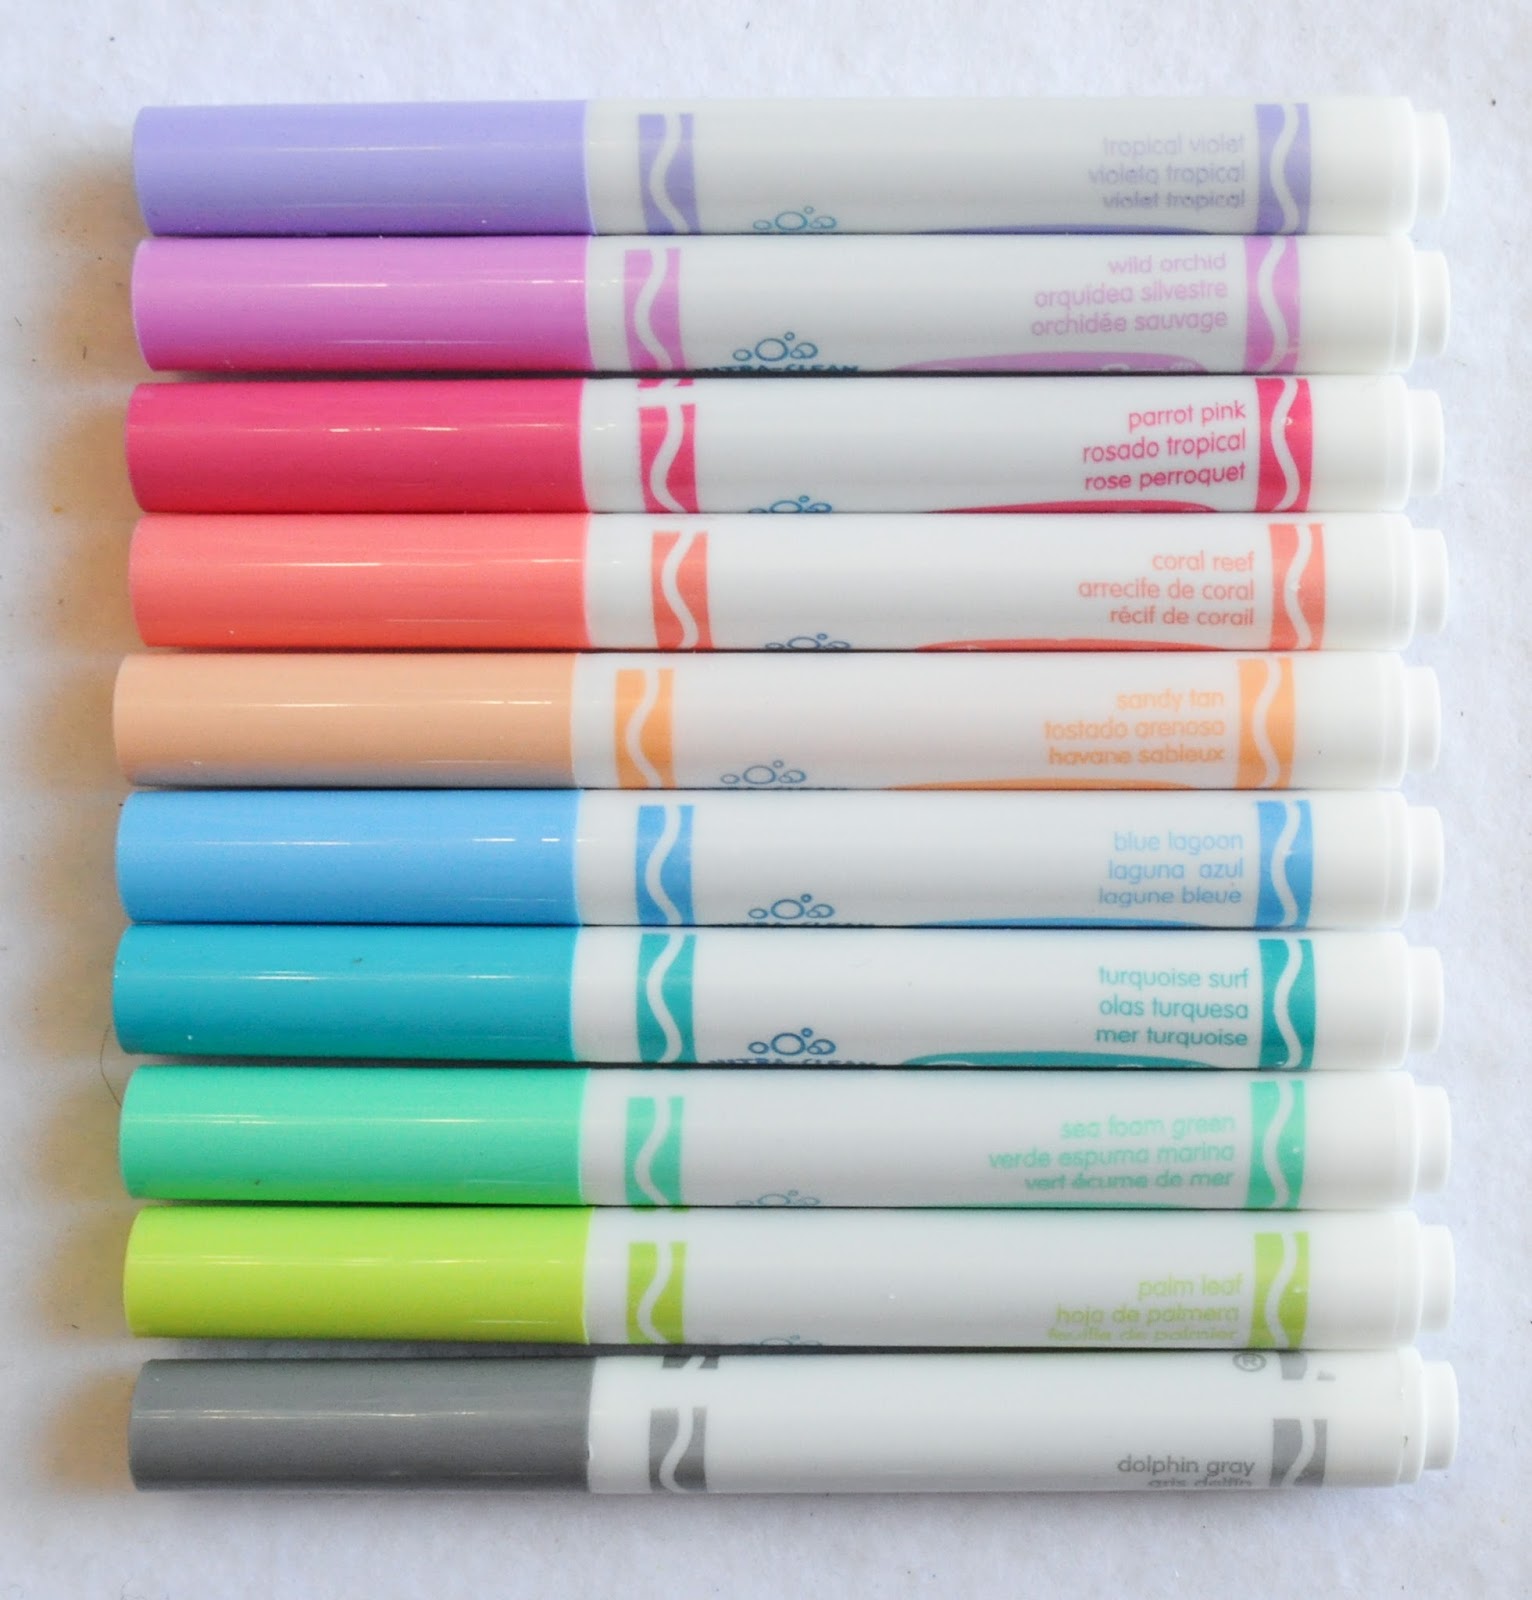 Crayola Washable Markers, Bright Colors